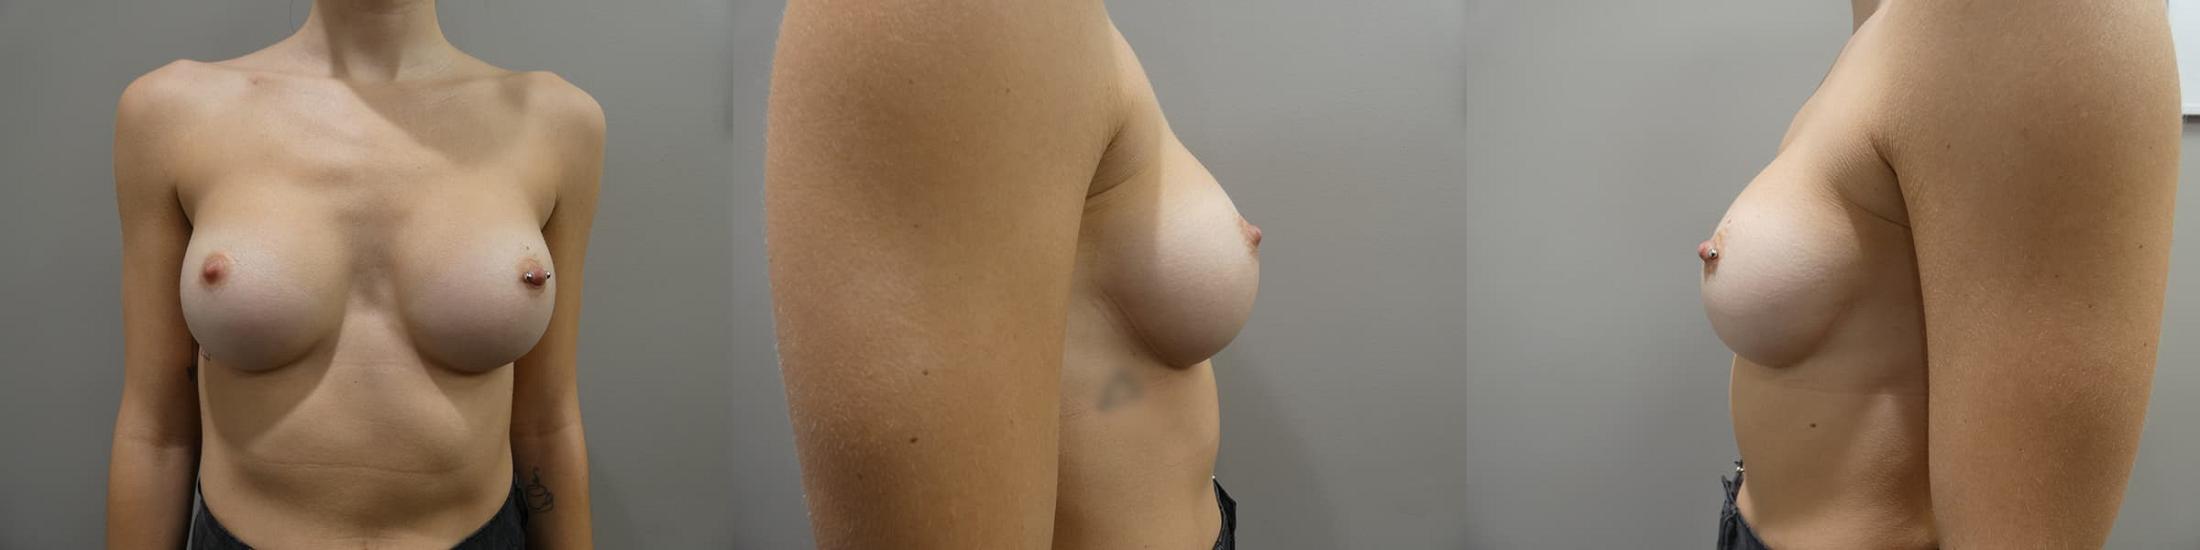 Breast Augmentation Before and After Post Op 1 Year